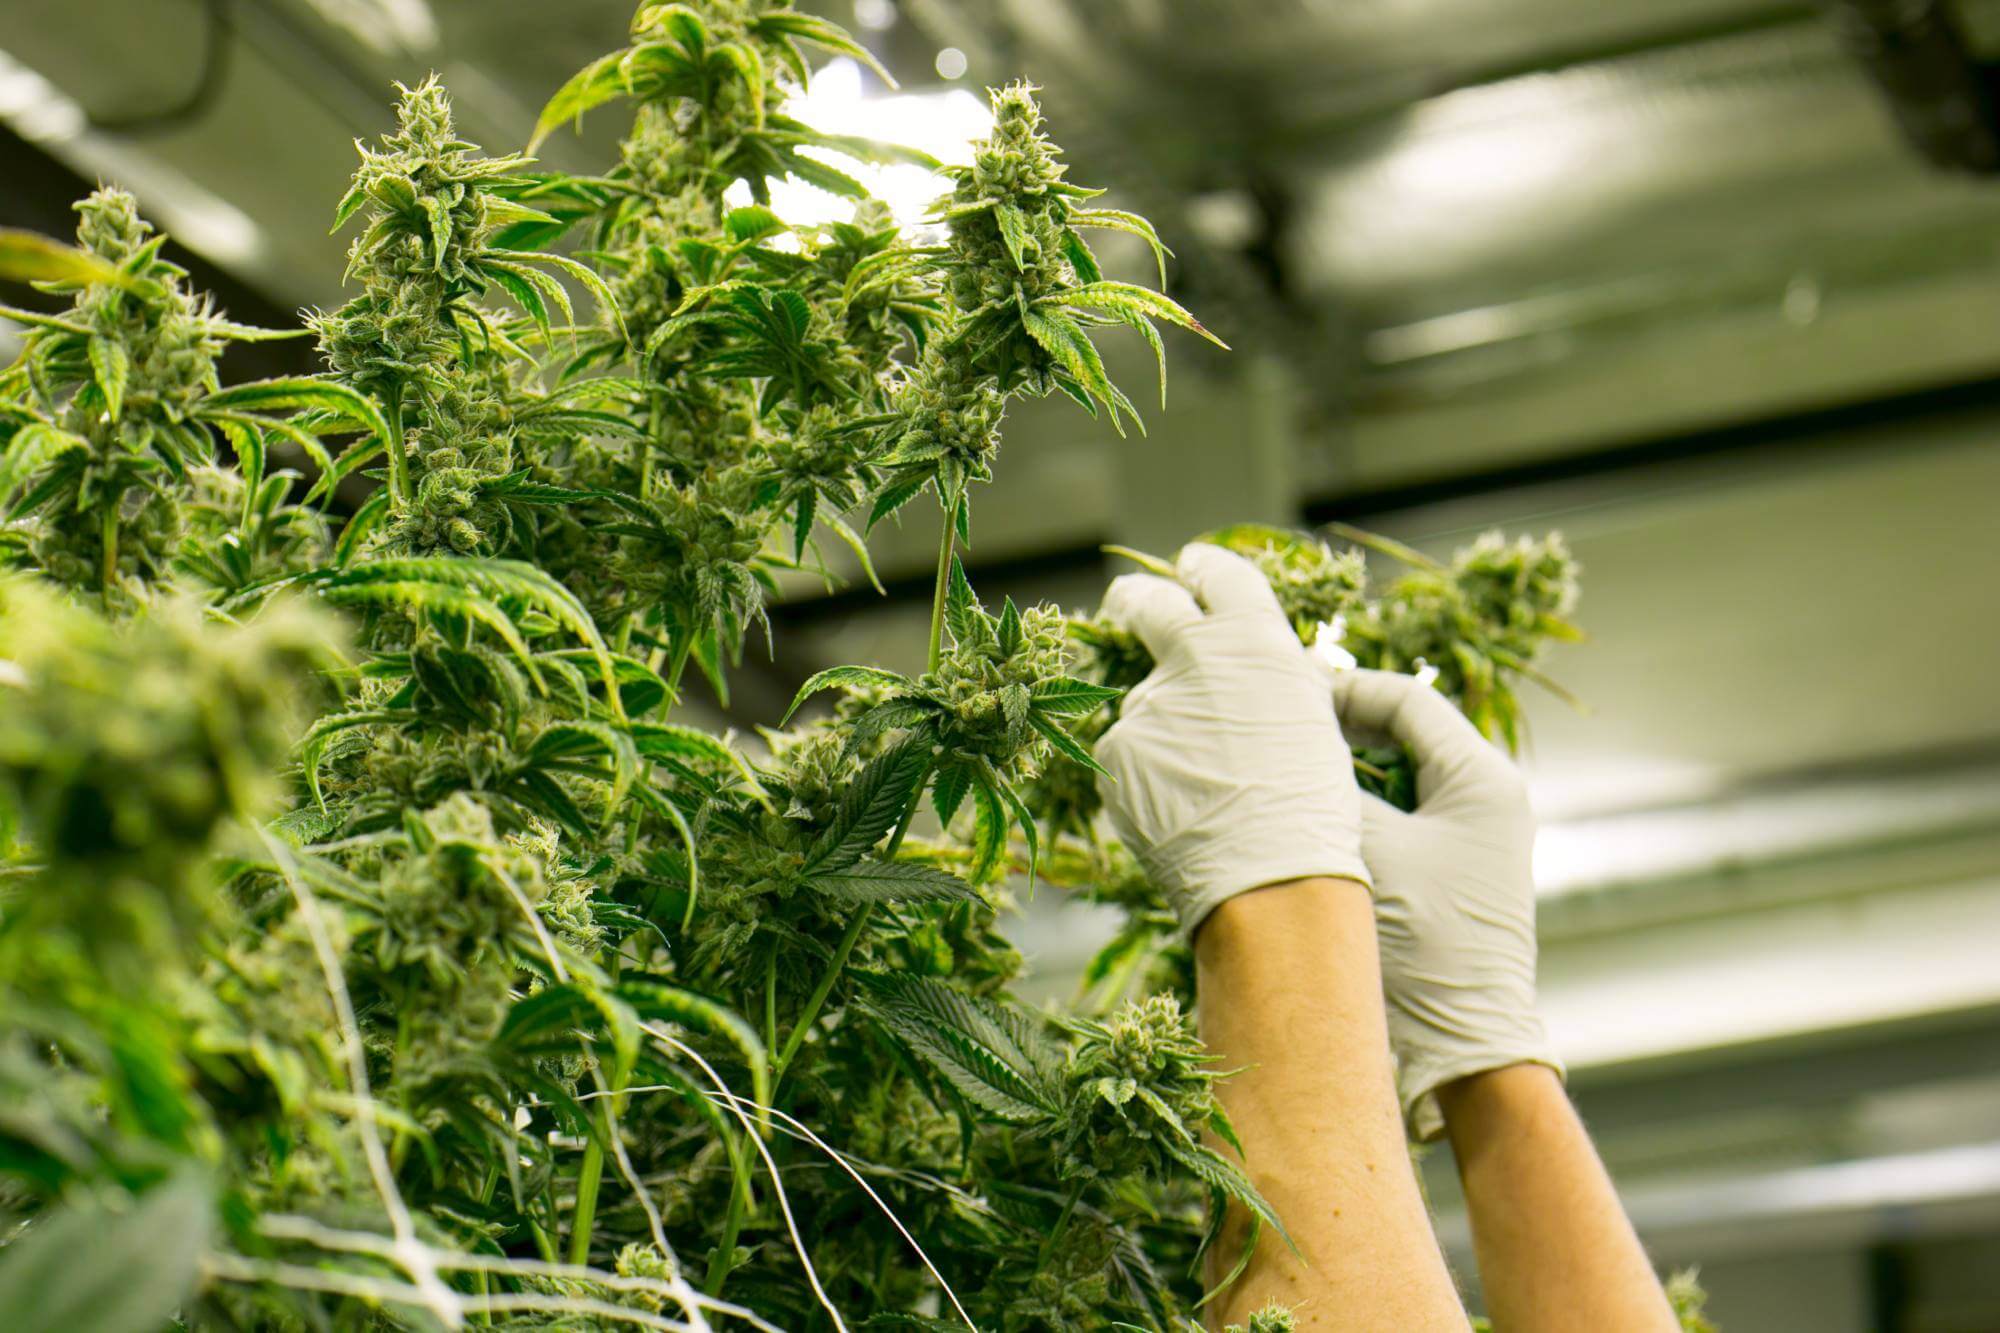 hands with gloves harvest cannabis plant